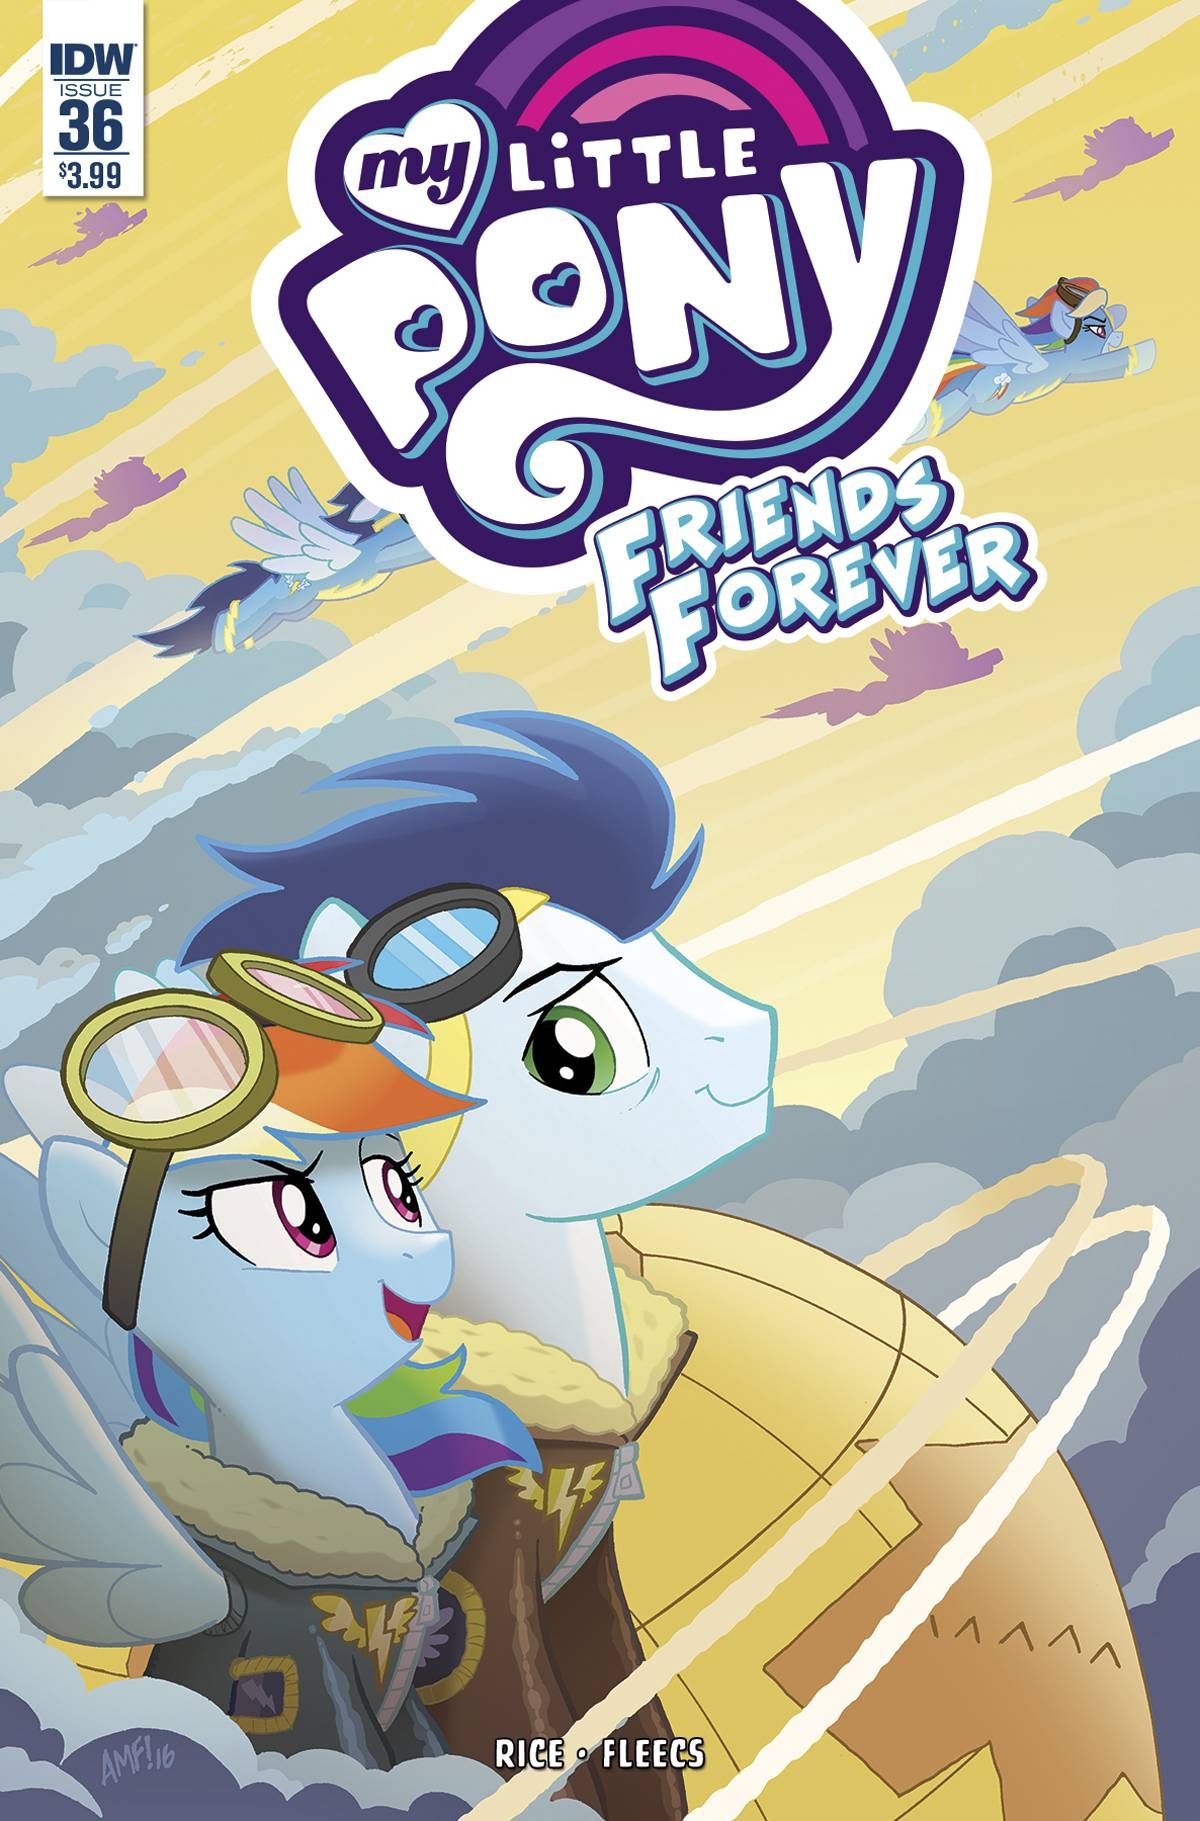 My Little Pony Friends Forever #36 Comic